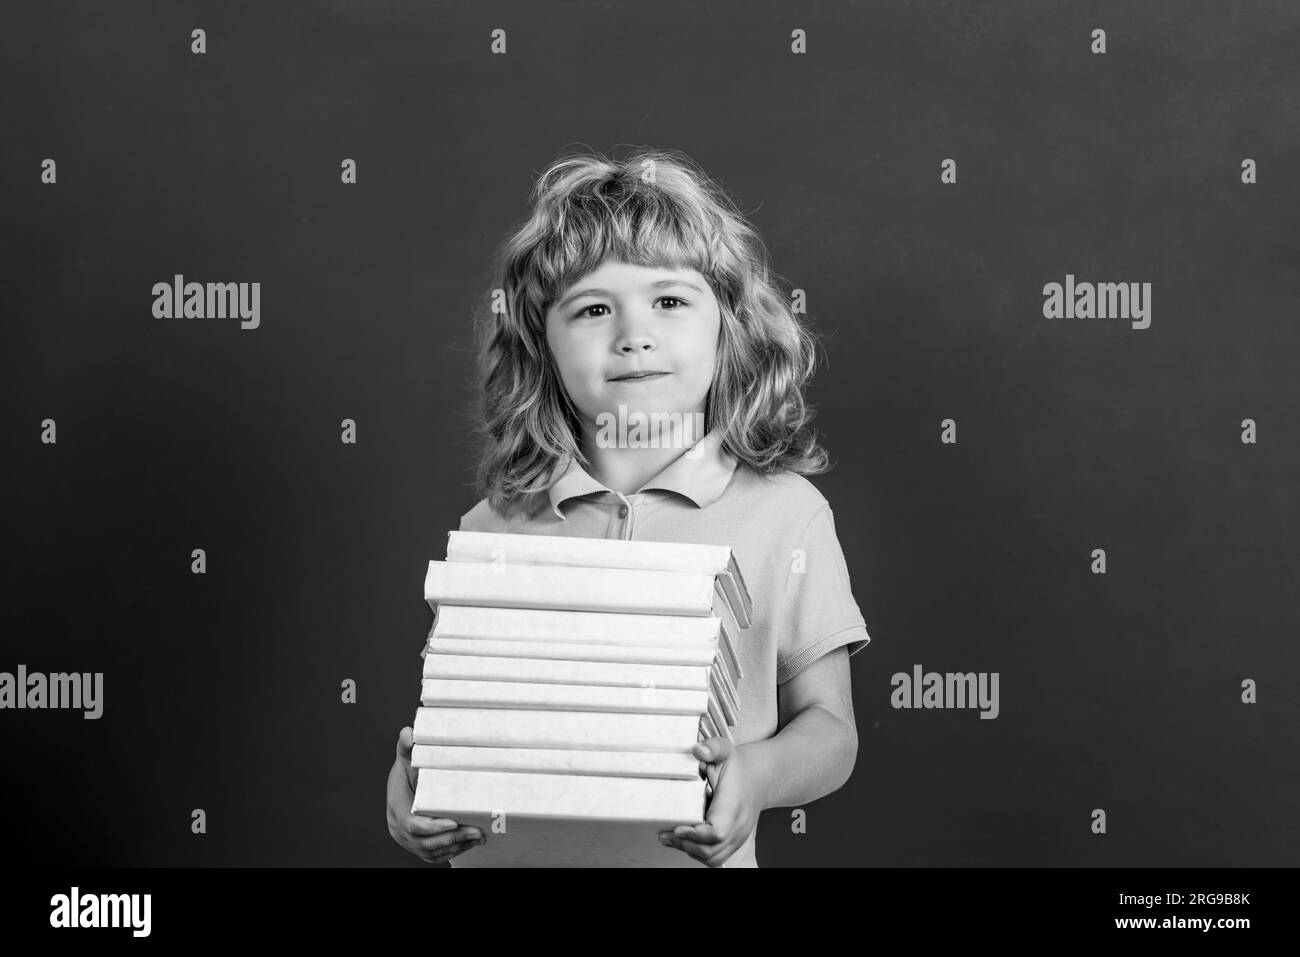 Education and creativity concept. Child holding stack of books with mortar board on blackboard. Back to school. Schoolchild in class. Black and white Stock Photo